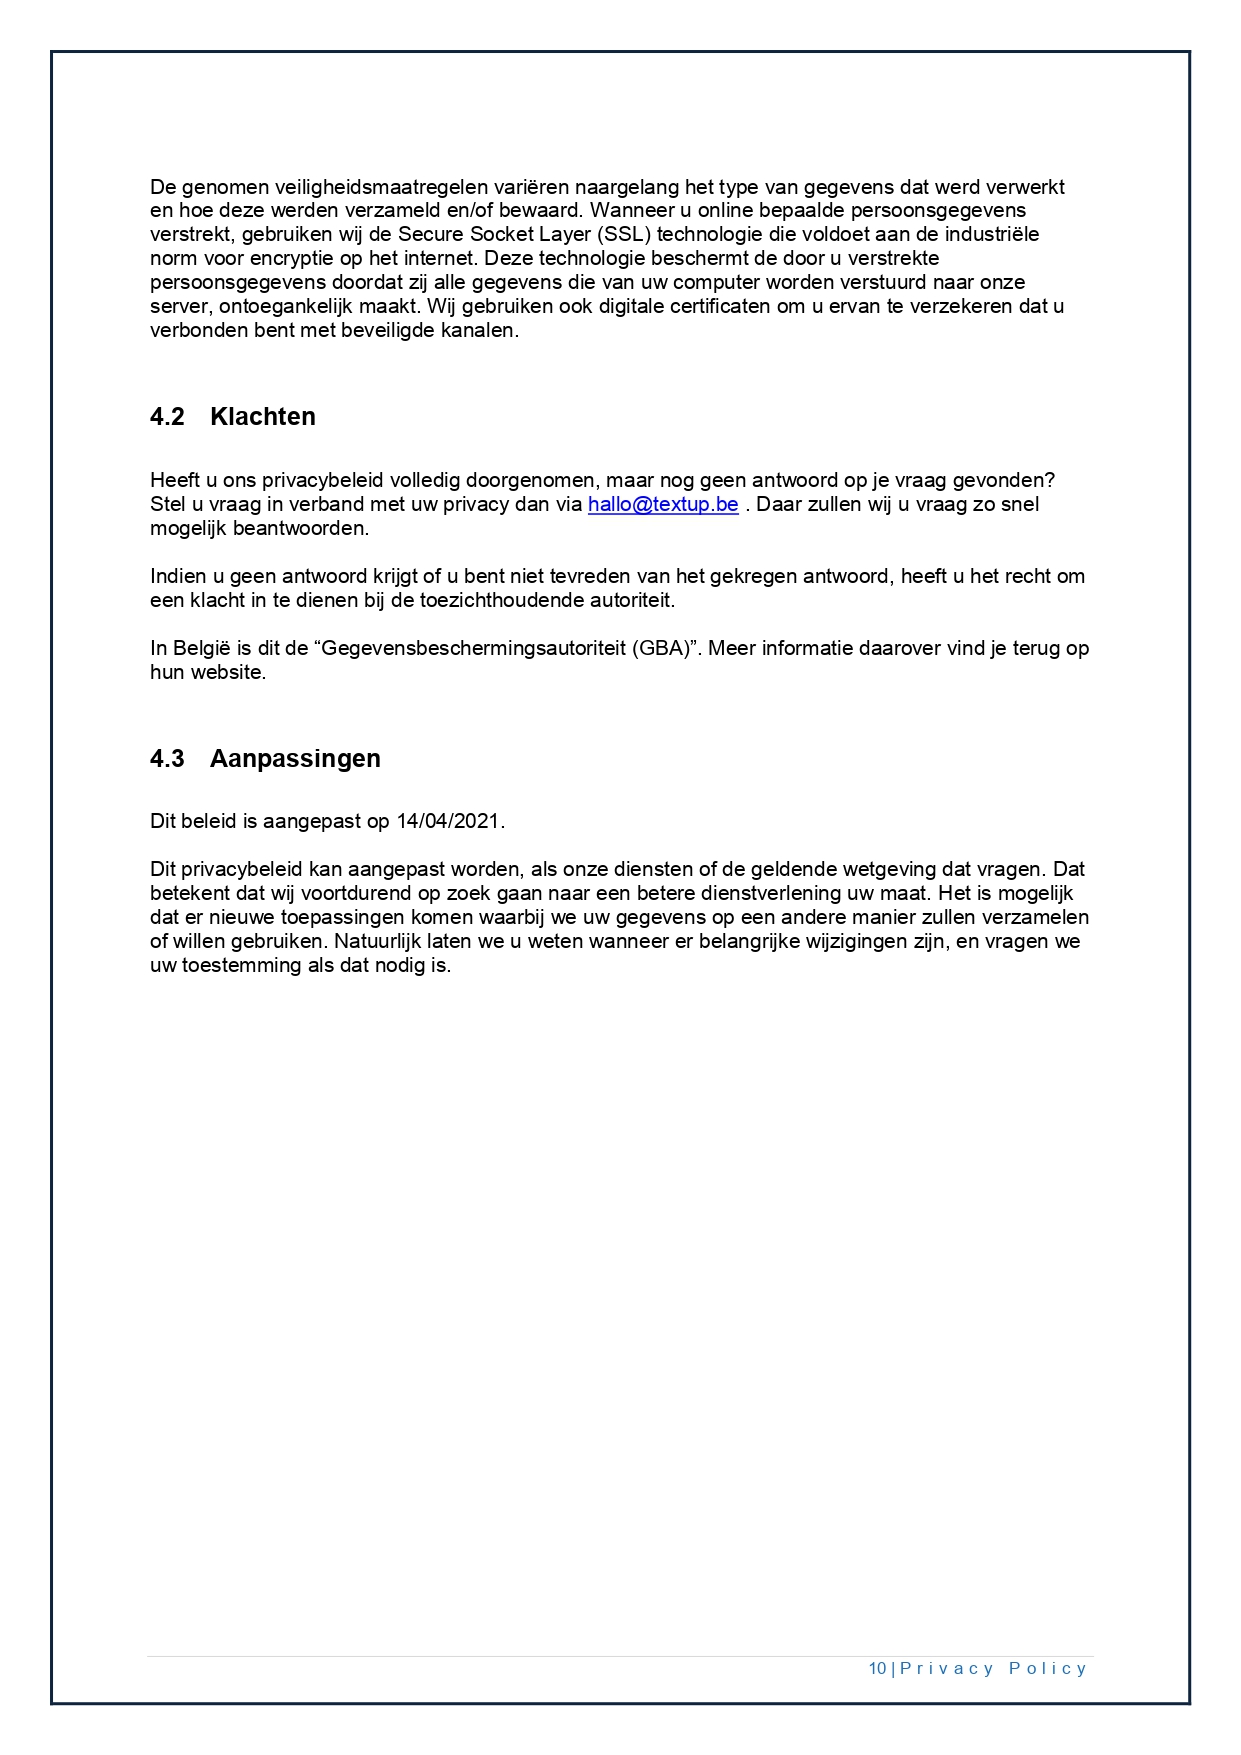 02 Privacy Policy textup.be NL V1.0 page 0010